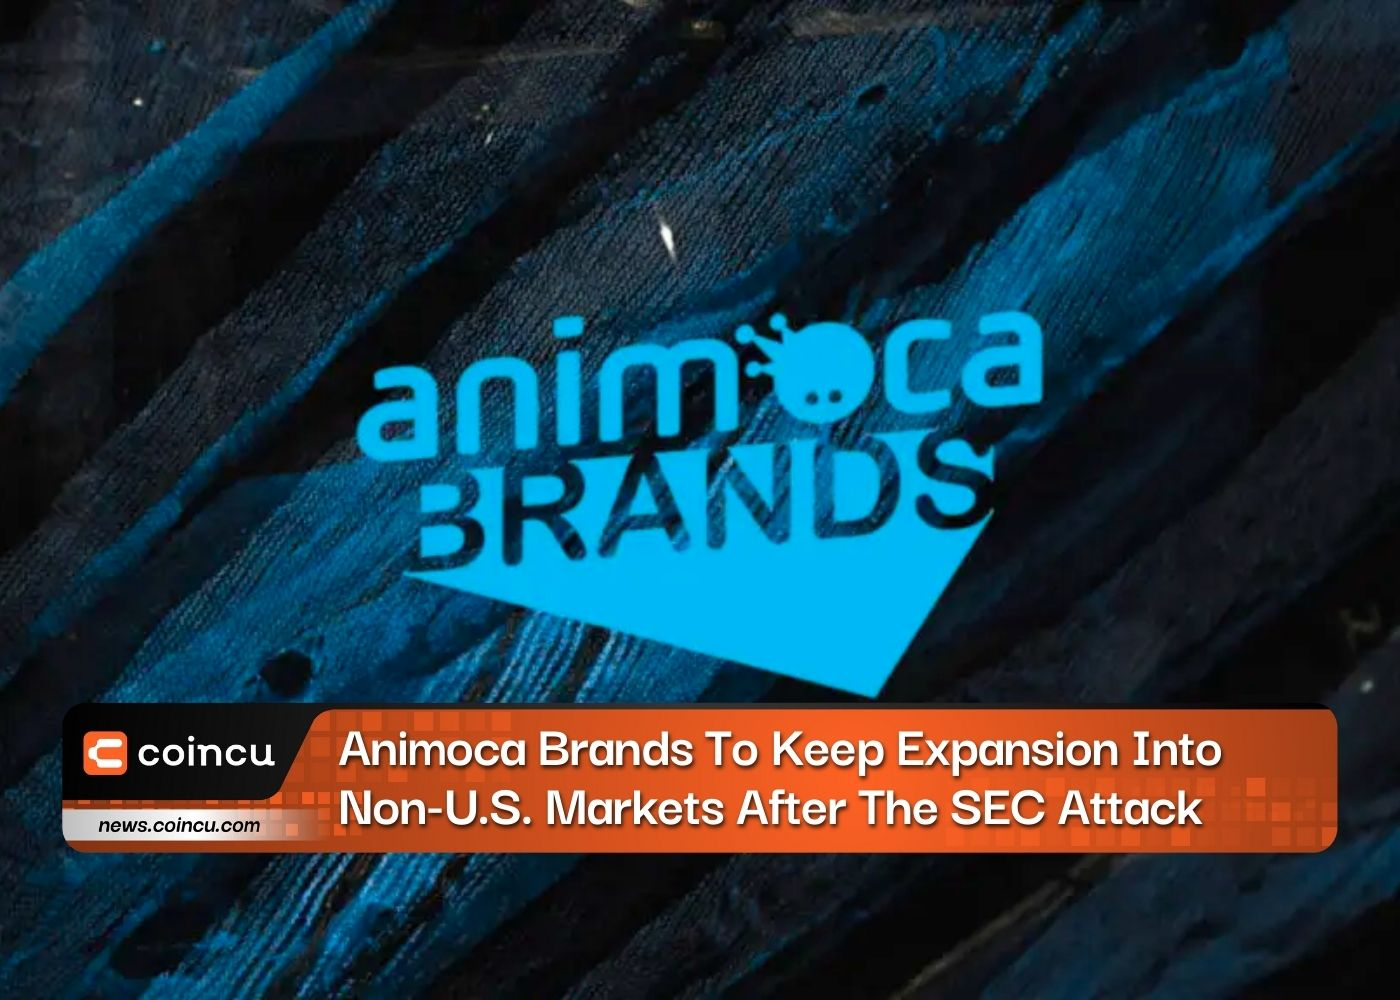 Animoca Brands To Keep Expansion Into Non-U.S. Markets After The SEC Attack